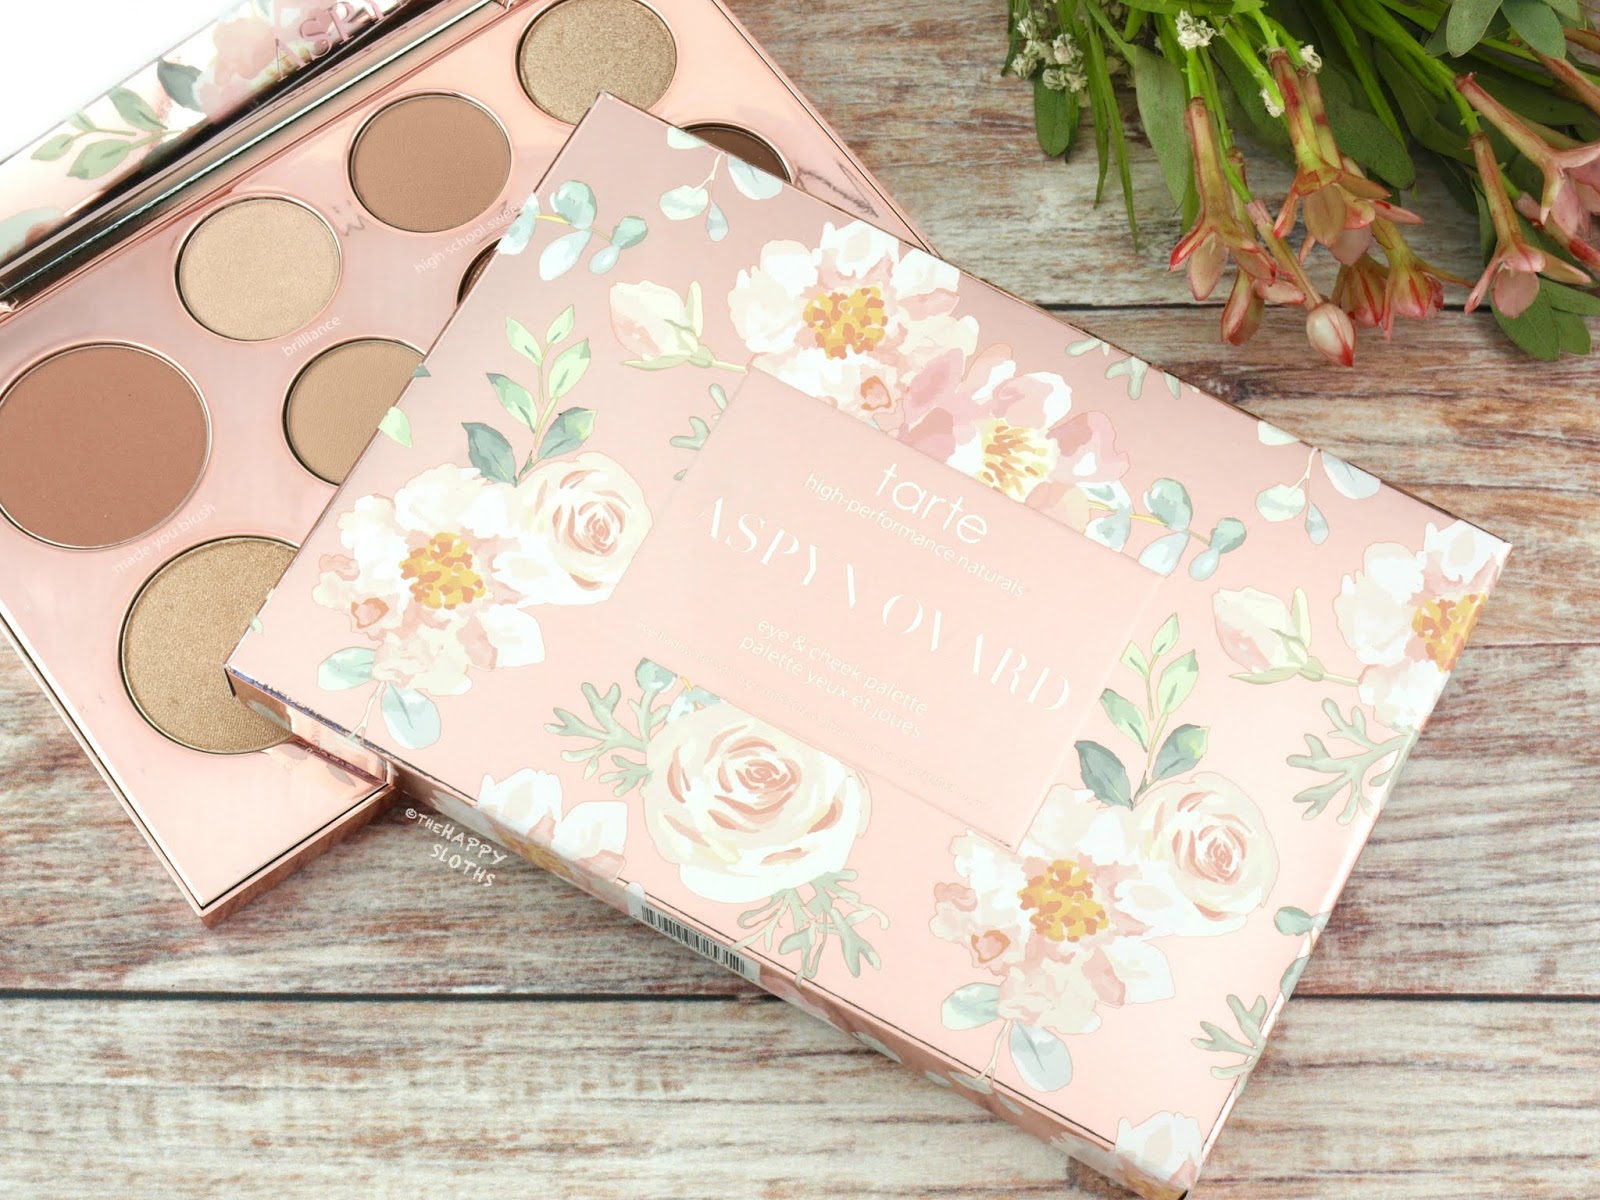 Tarte | Aspyn Ovard Eye & Cheek Palette: Review and Swatches